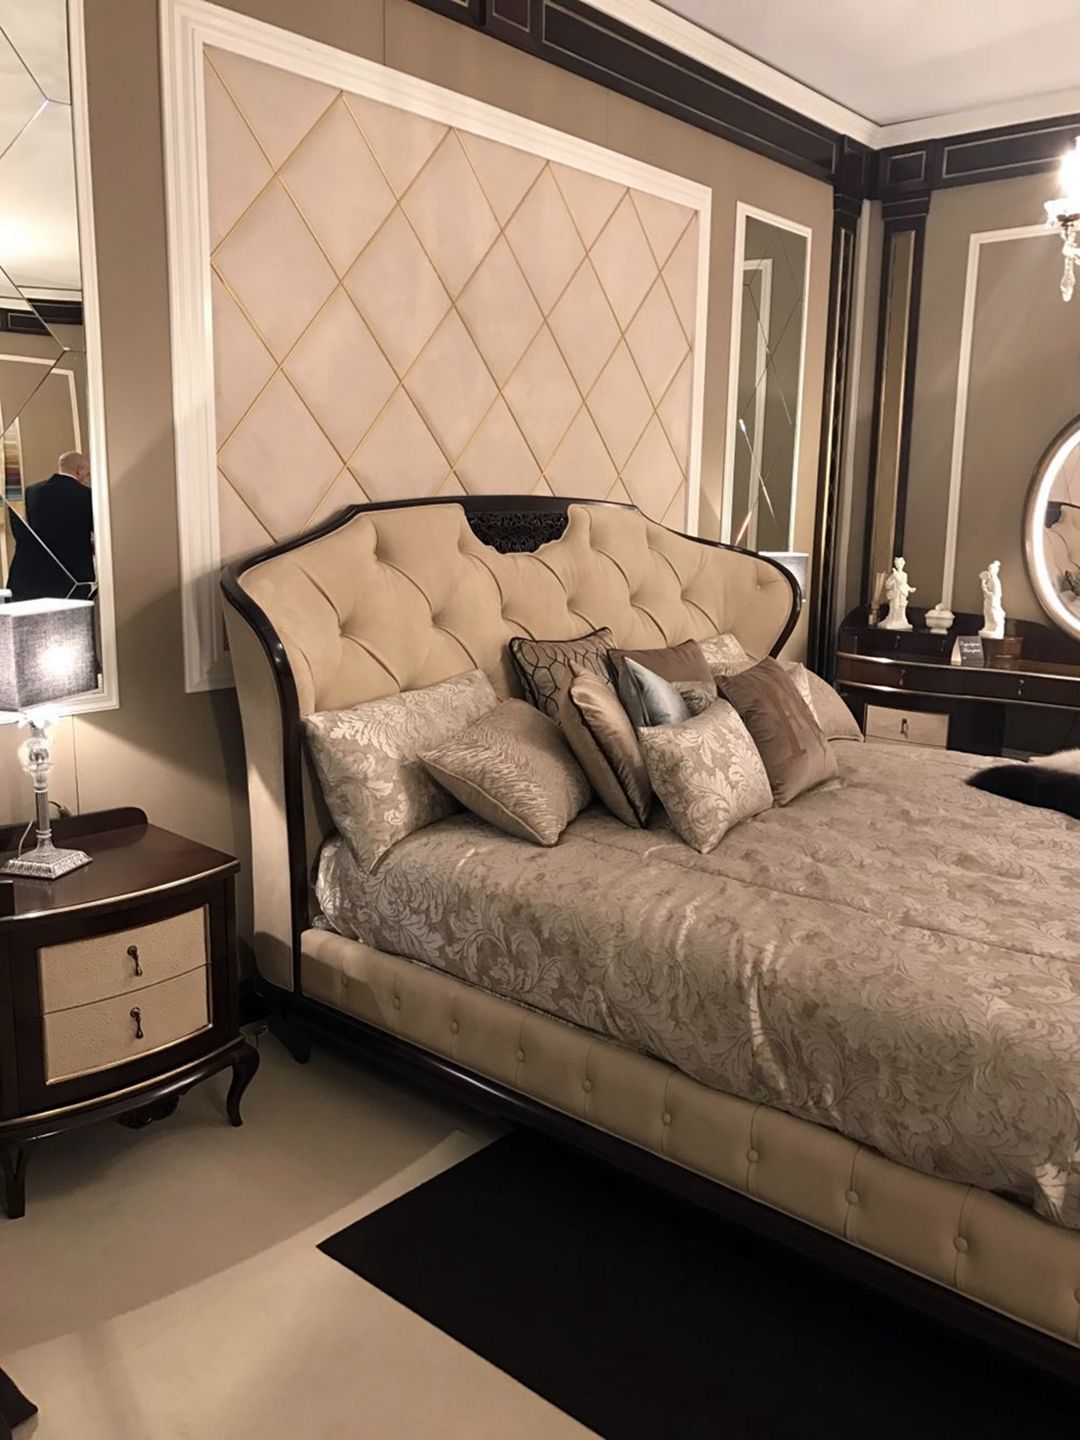 Baroque Bed With Curved Headboard For A Cream Neutral Design From Homedit